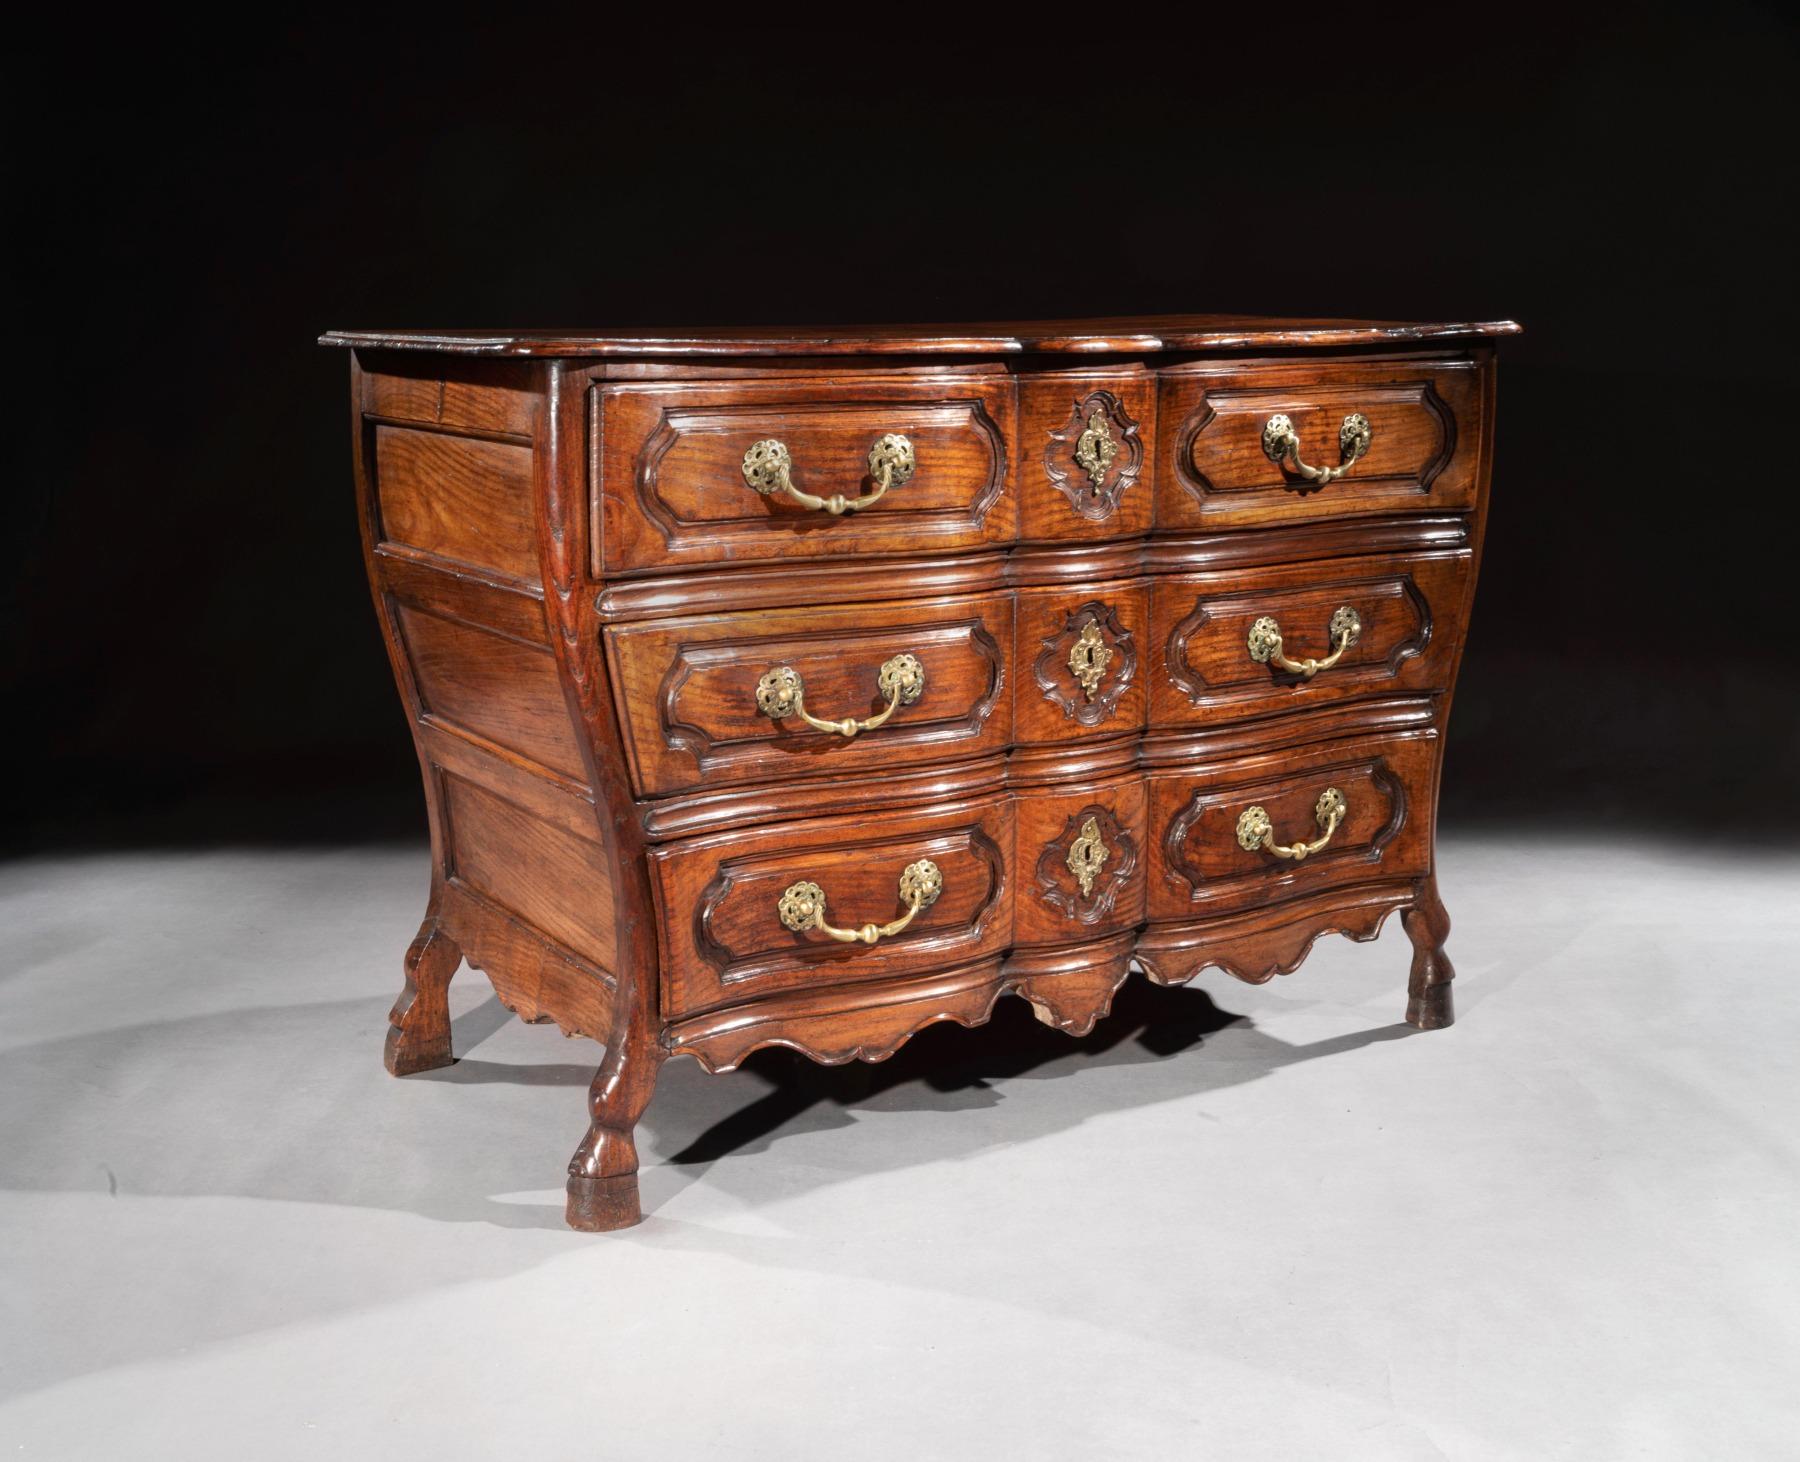 A rare 18th century Louis XV period bombe shaped chestnut provincial commode.

French circa 1750

Of an unusual curvaceous waisted form having a shaped front (often referred to as arc-en-arbalète, meaning in English shape of the crossbow) of